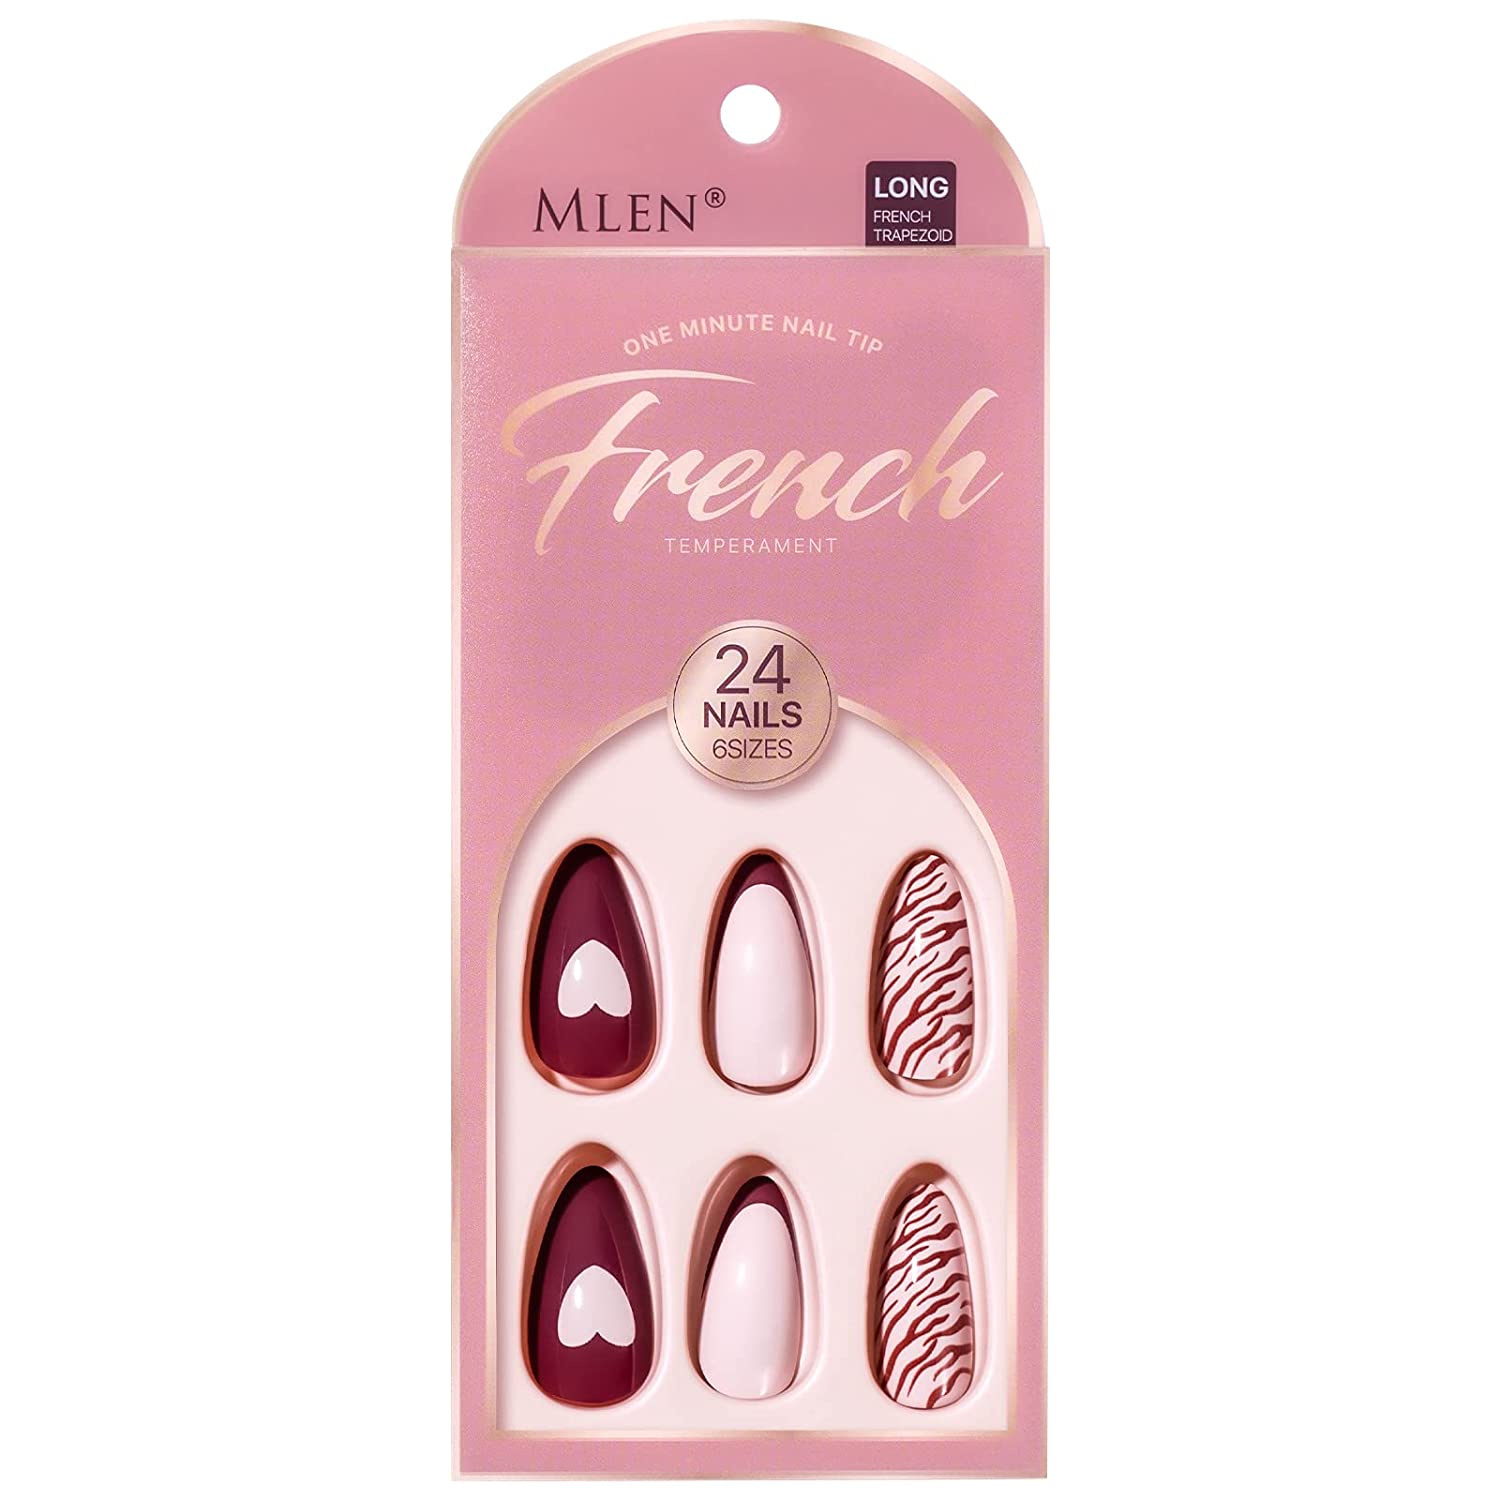 Mlen Red Press On Nails Long Coffin Fake Nails Frosted French Tip Press On Nails With Gel Acrylic Nails For Women And Girls 24Pcs